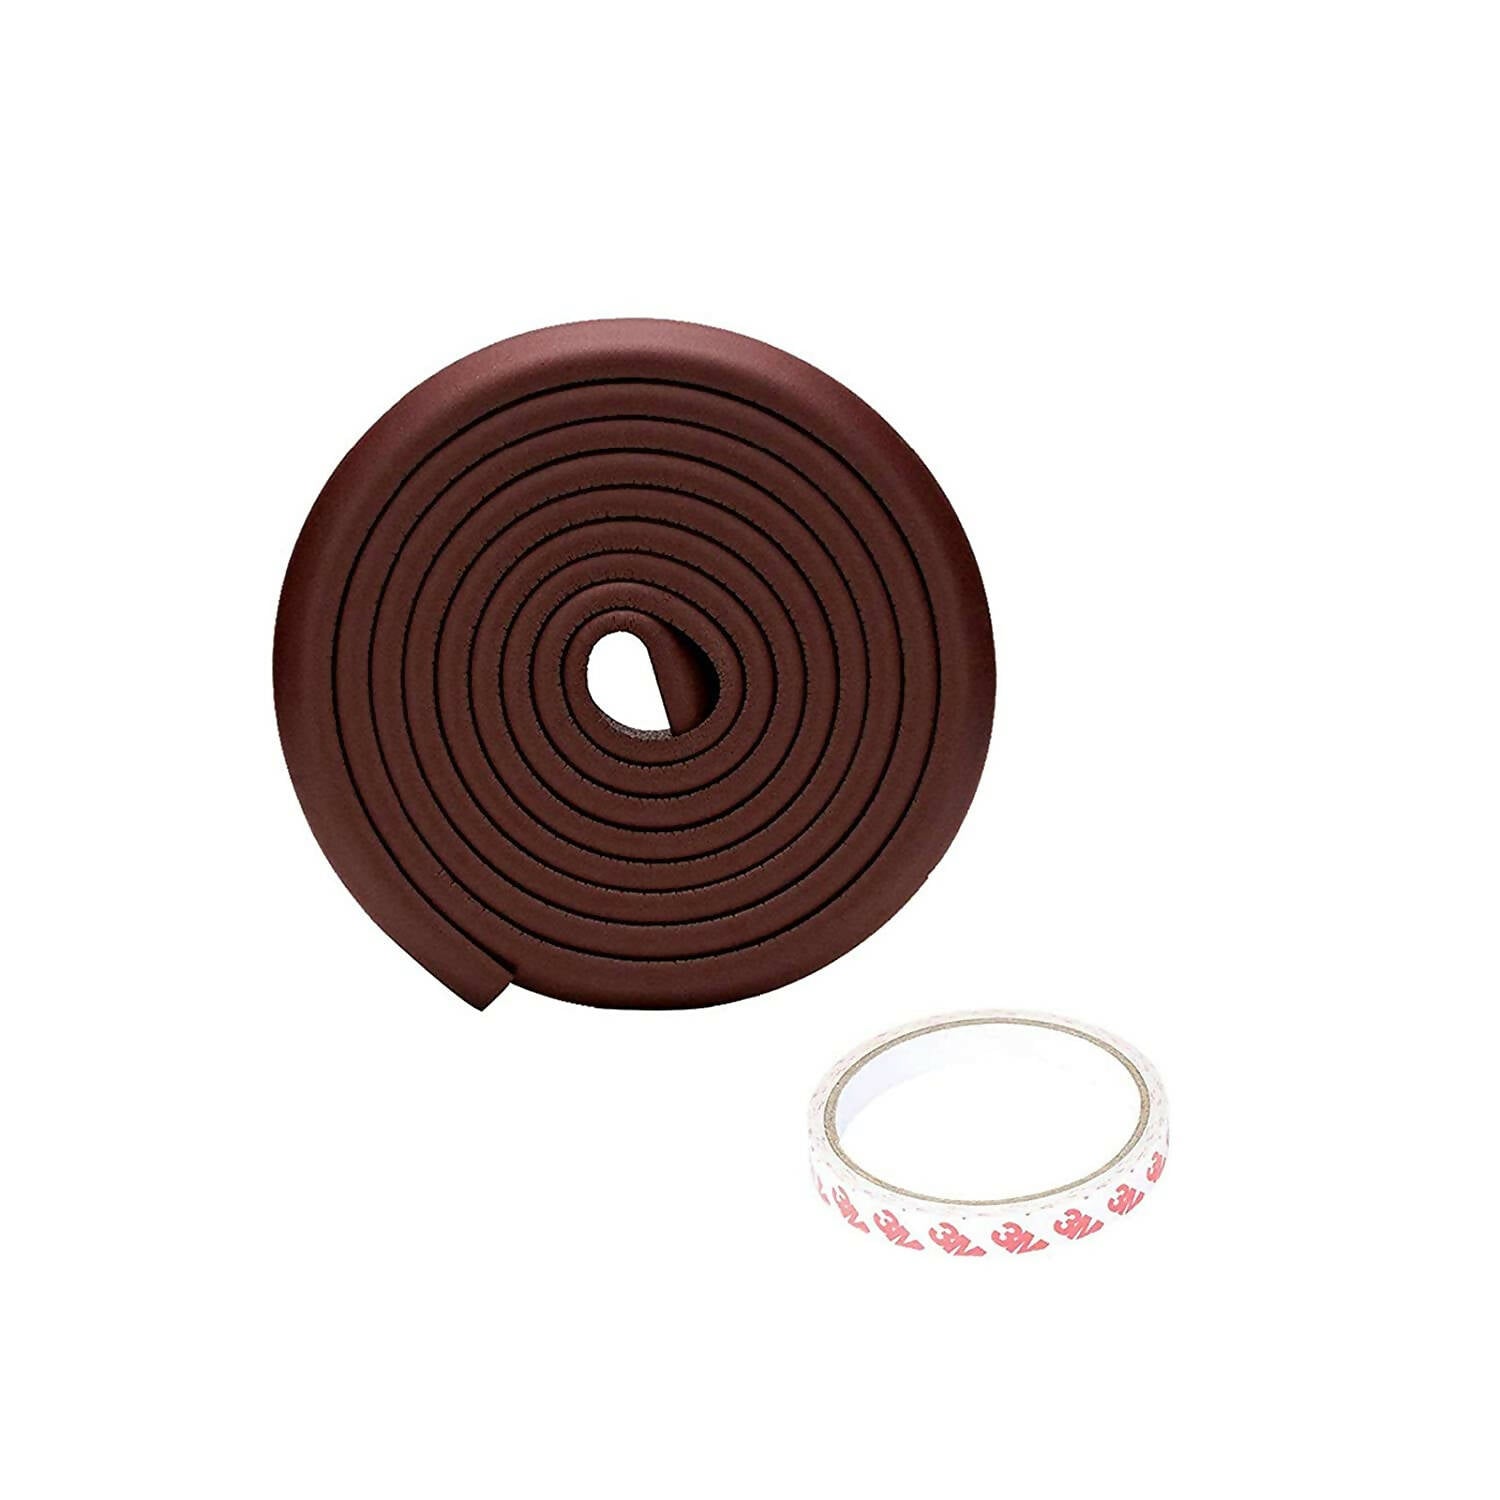 Safe-O-Kid High Density Edge Guards - 5 Mtr (Brown) For Kids Protection -  USA, Australia, Canada 